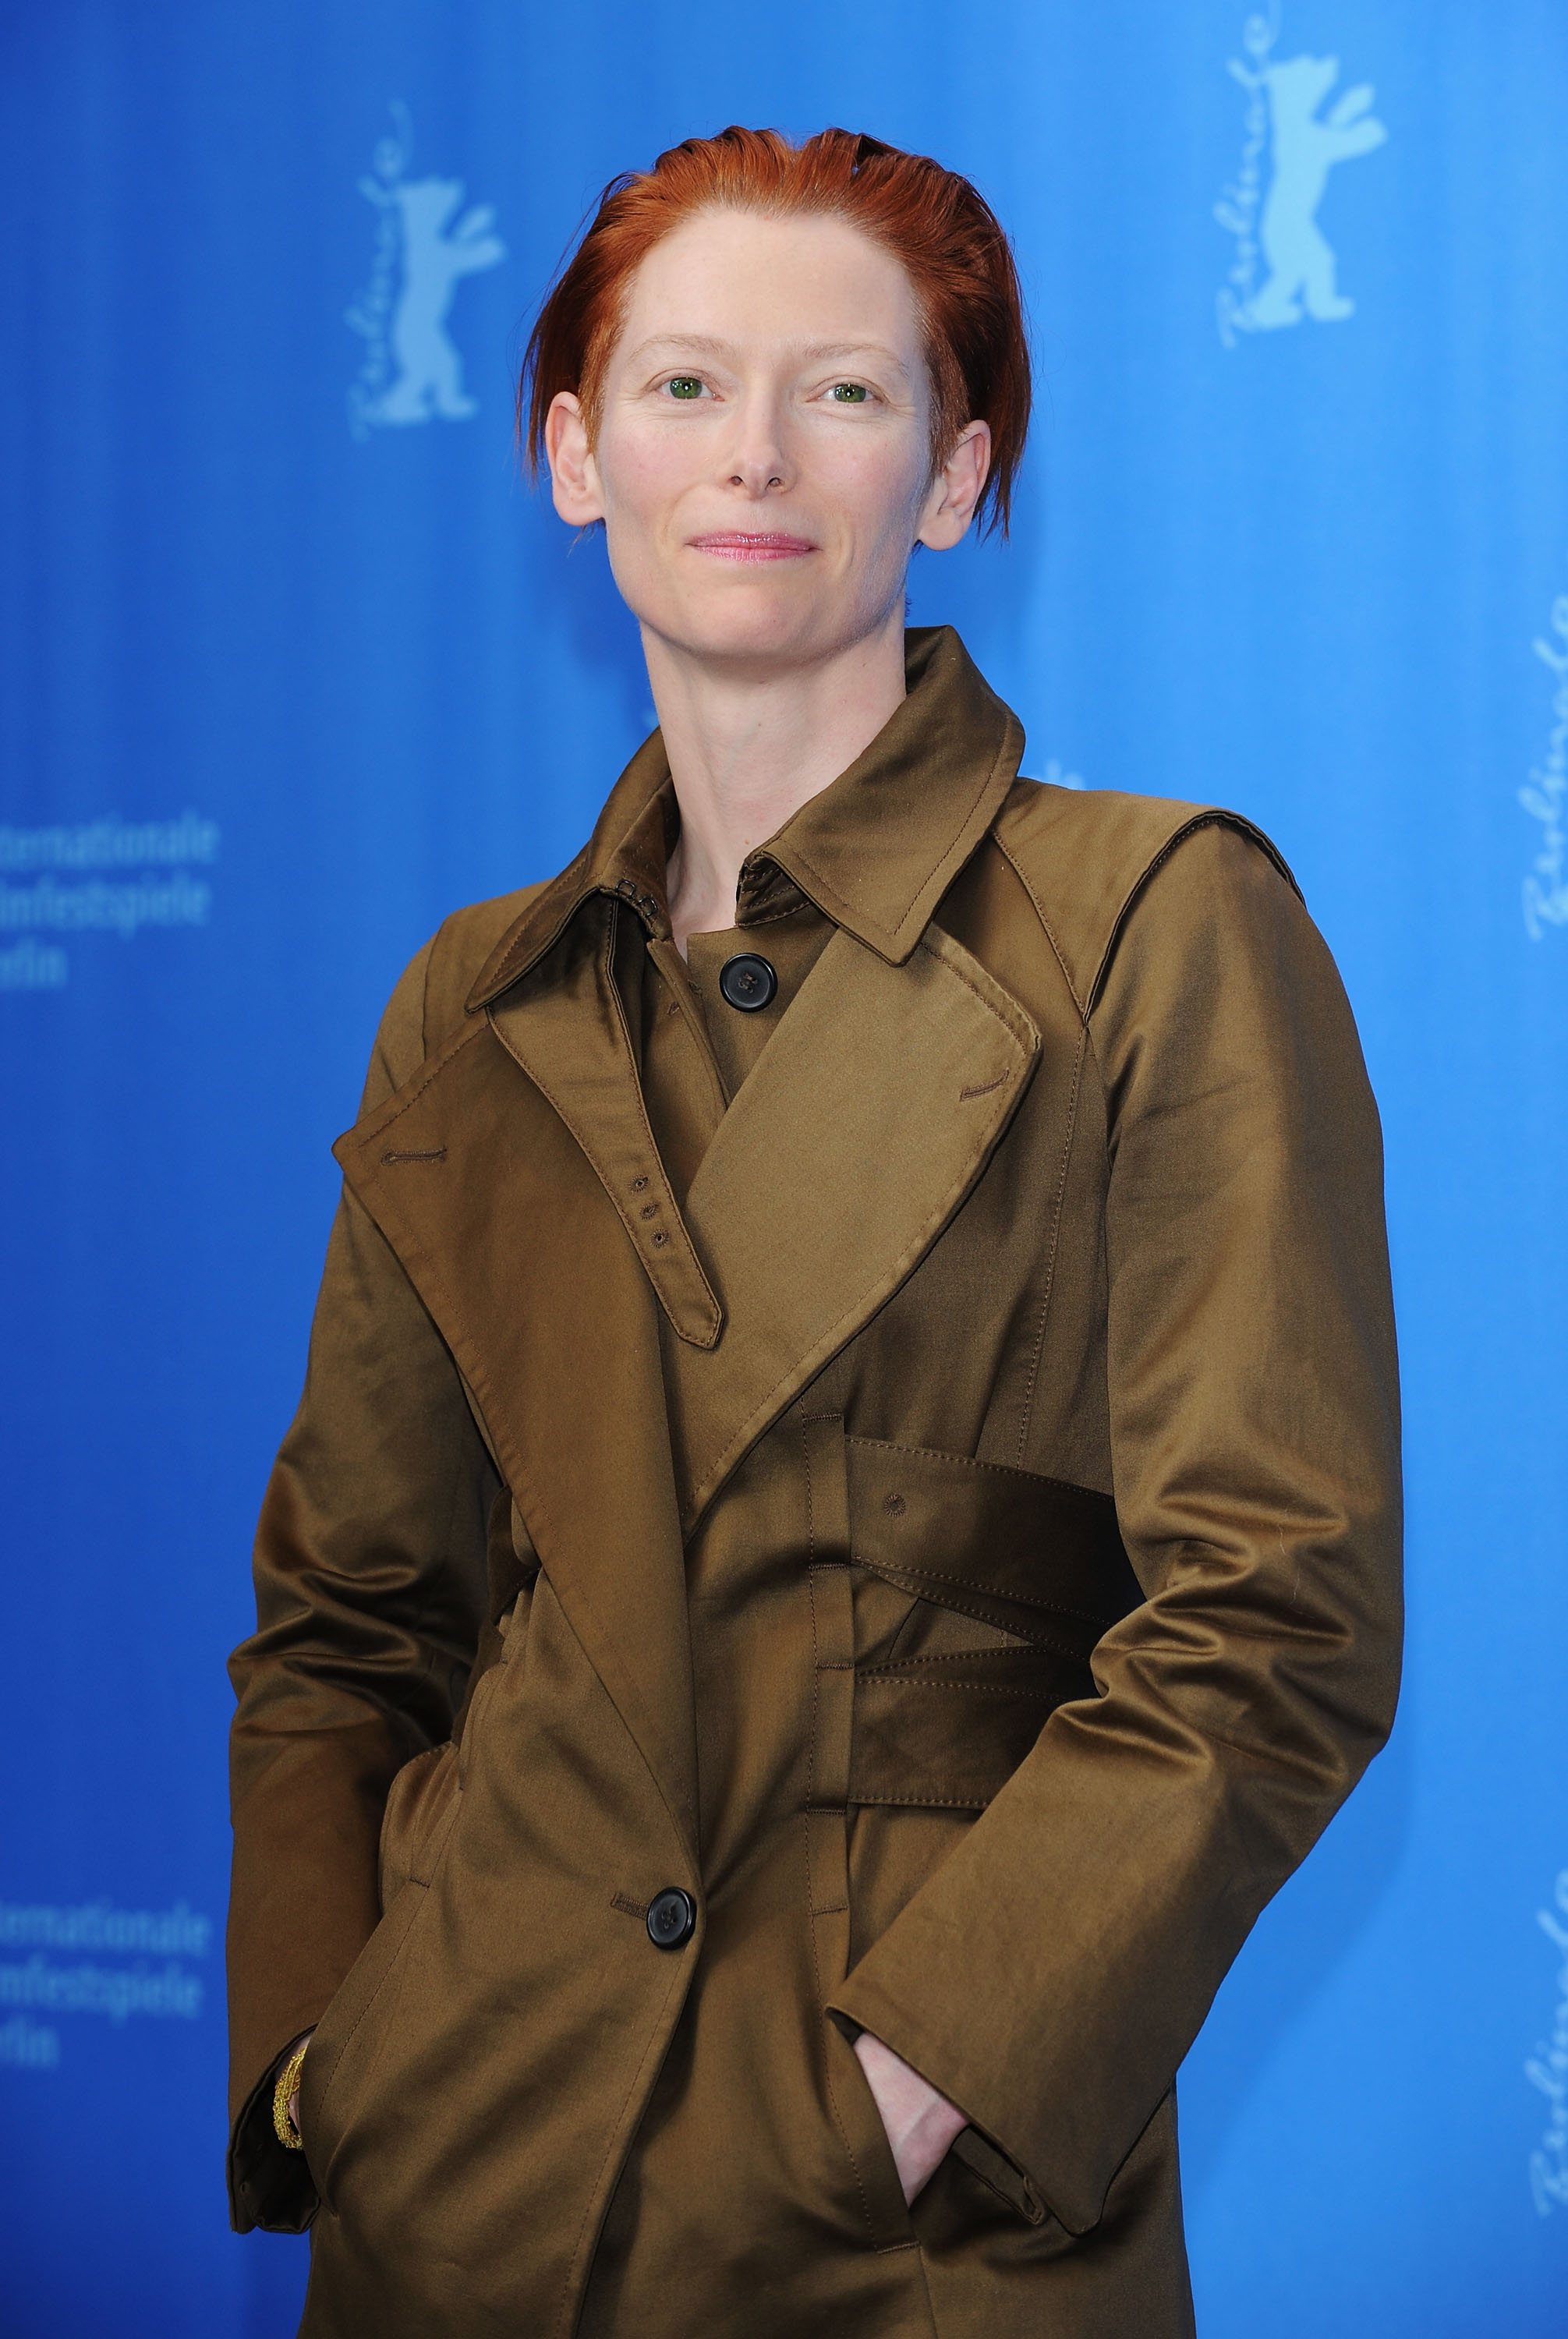 58th Berlinale Film Festival - Julia Photocall and Press Conference